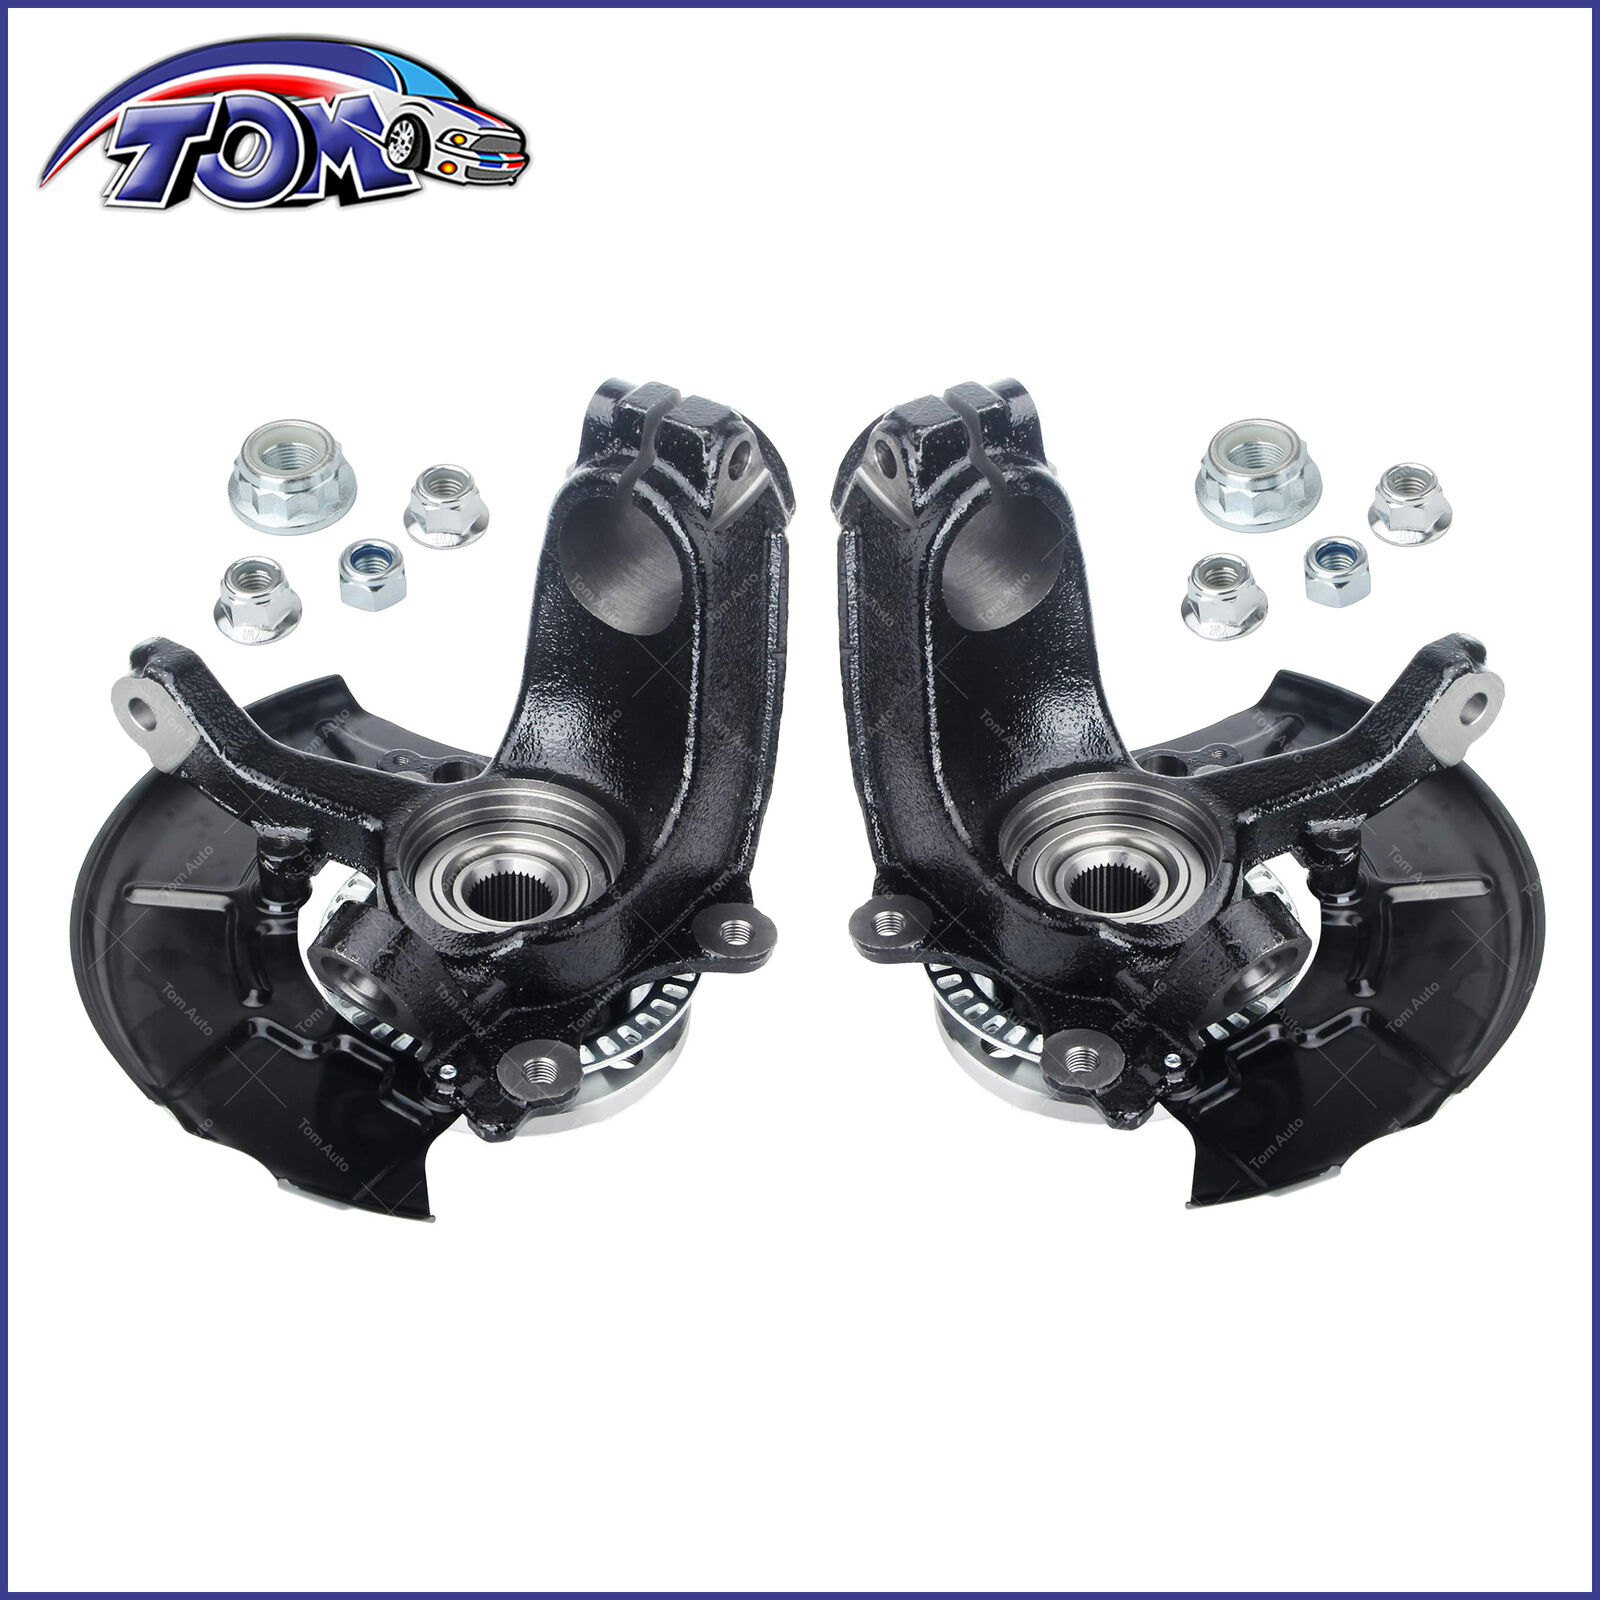 2x Steering Knuckle & Wheel Hub Bearing Assembly Front Side for VW Beetle Golf